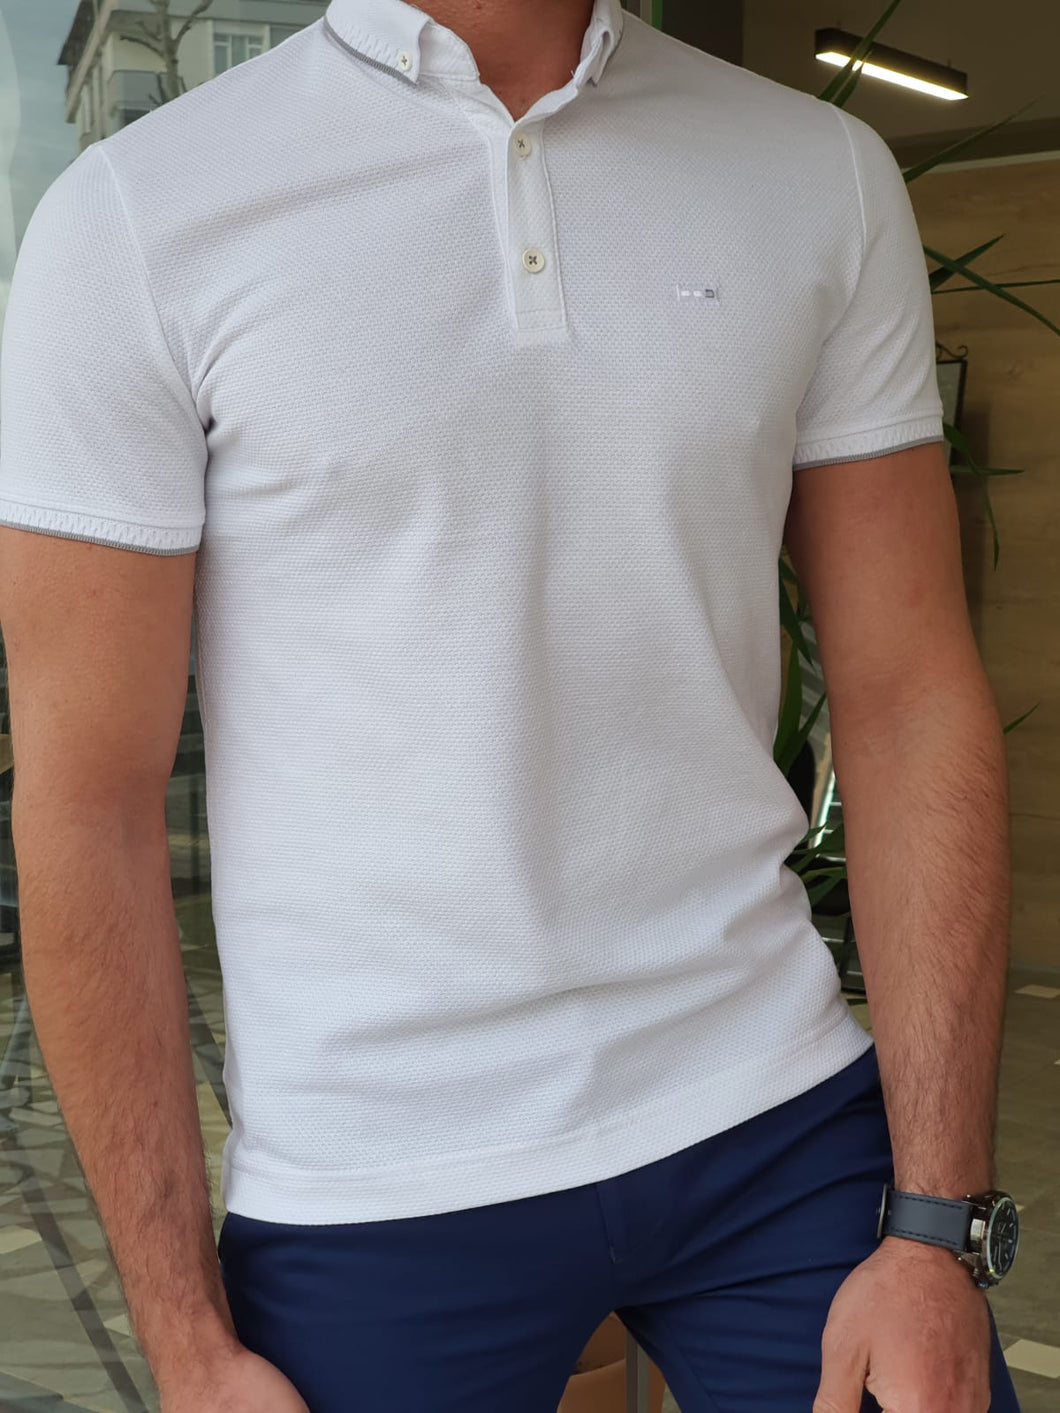 Jason Slim Fit Self-Patterned Polo White Tees